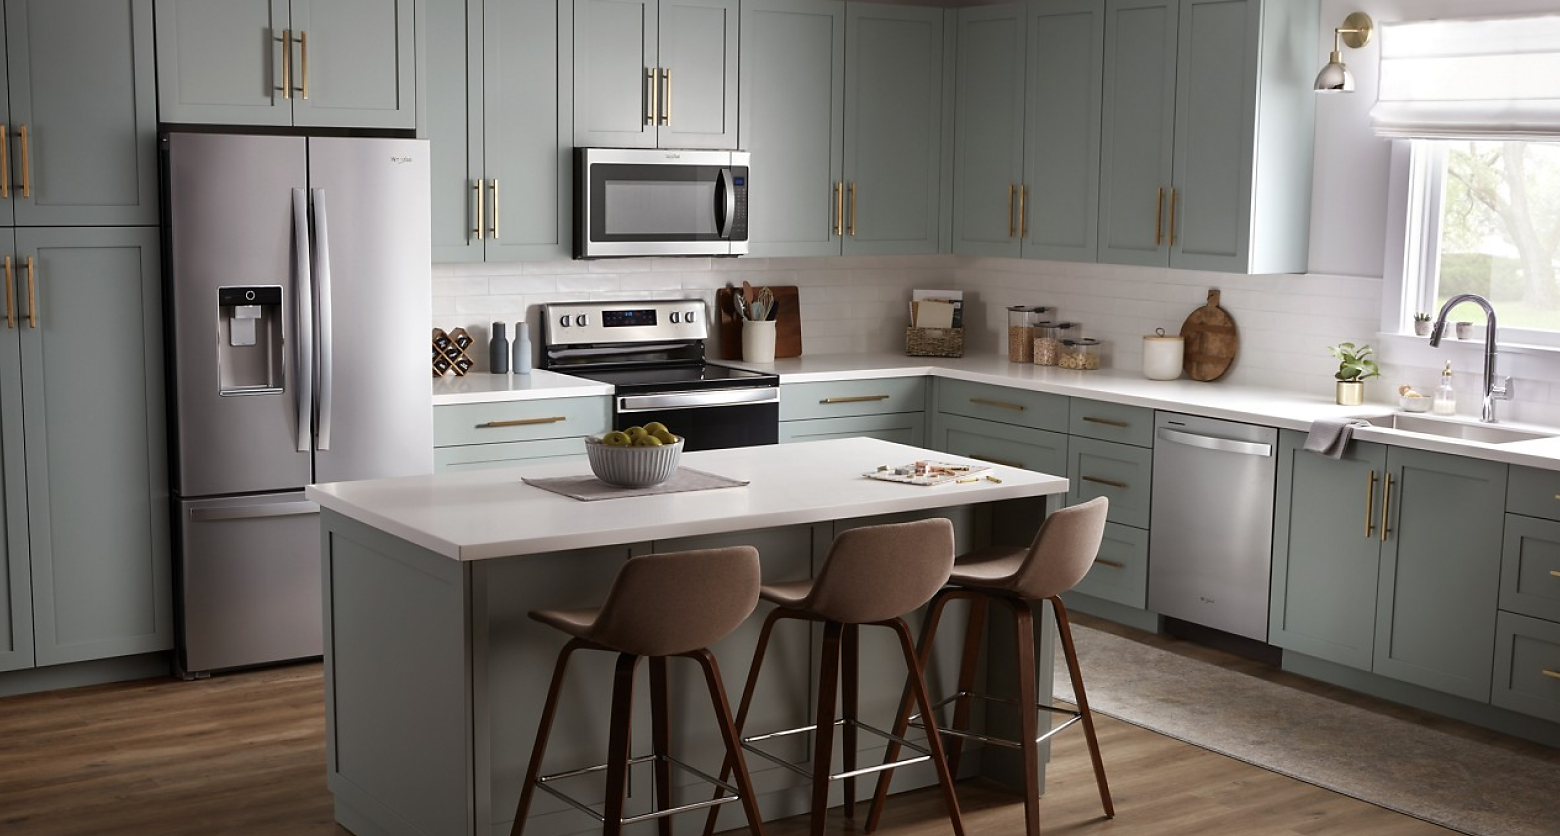 Appliance Colors 4 Options for Your Kitchen Whirlpool